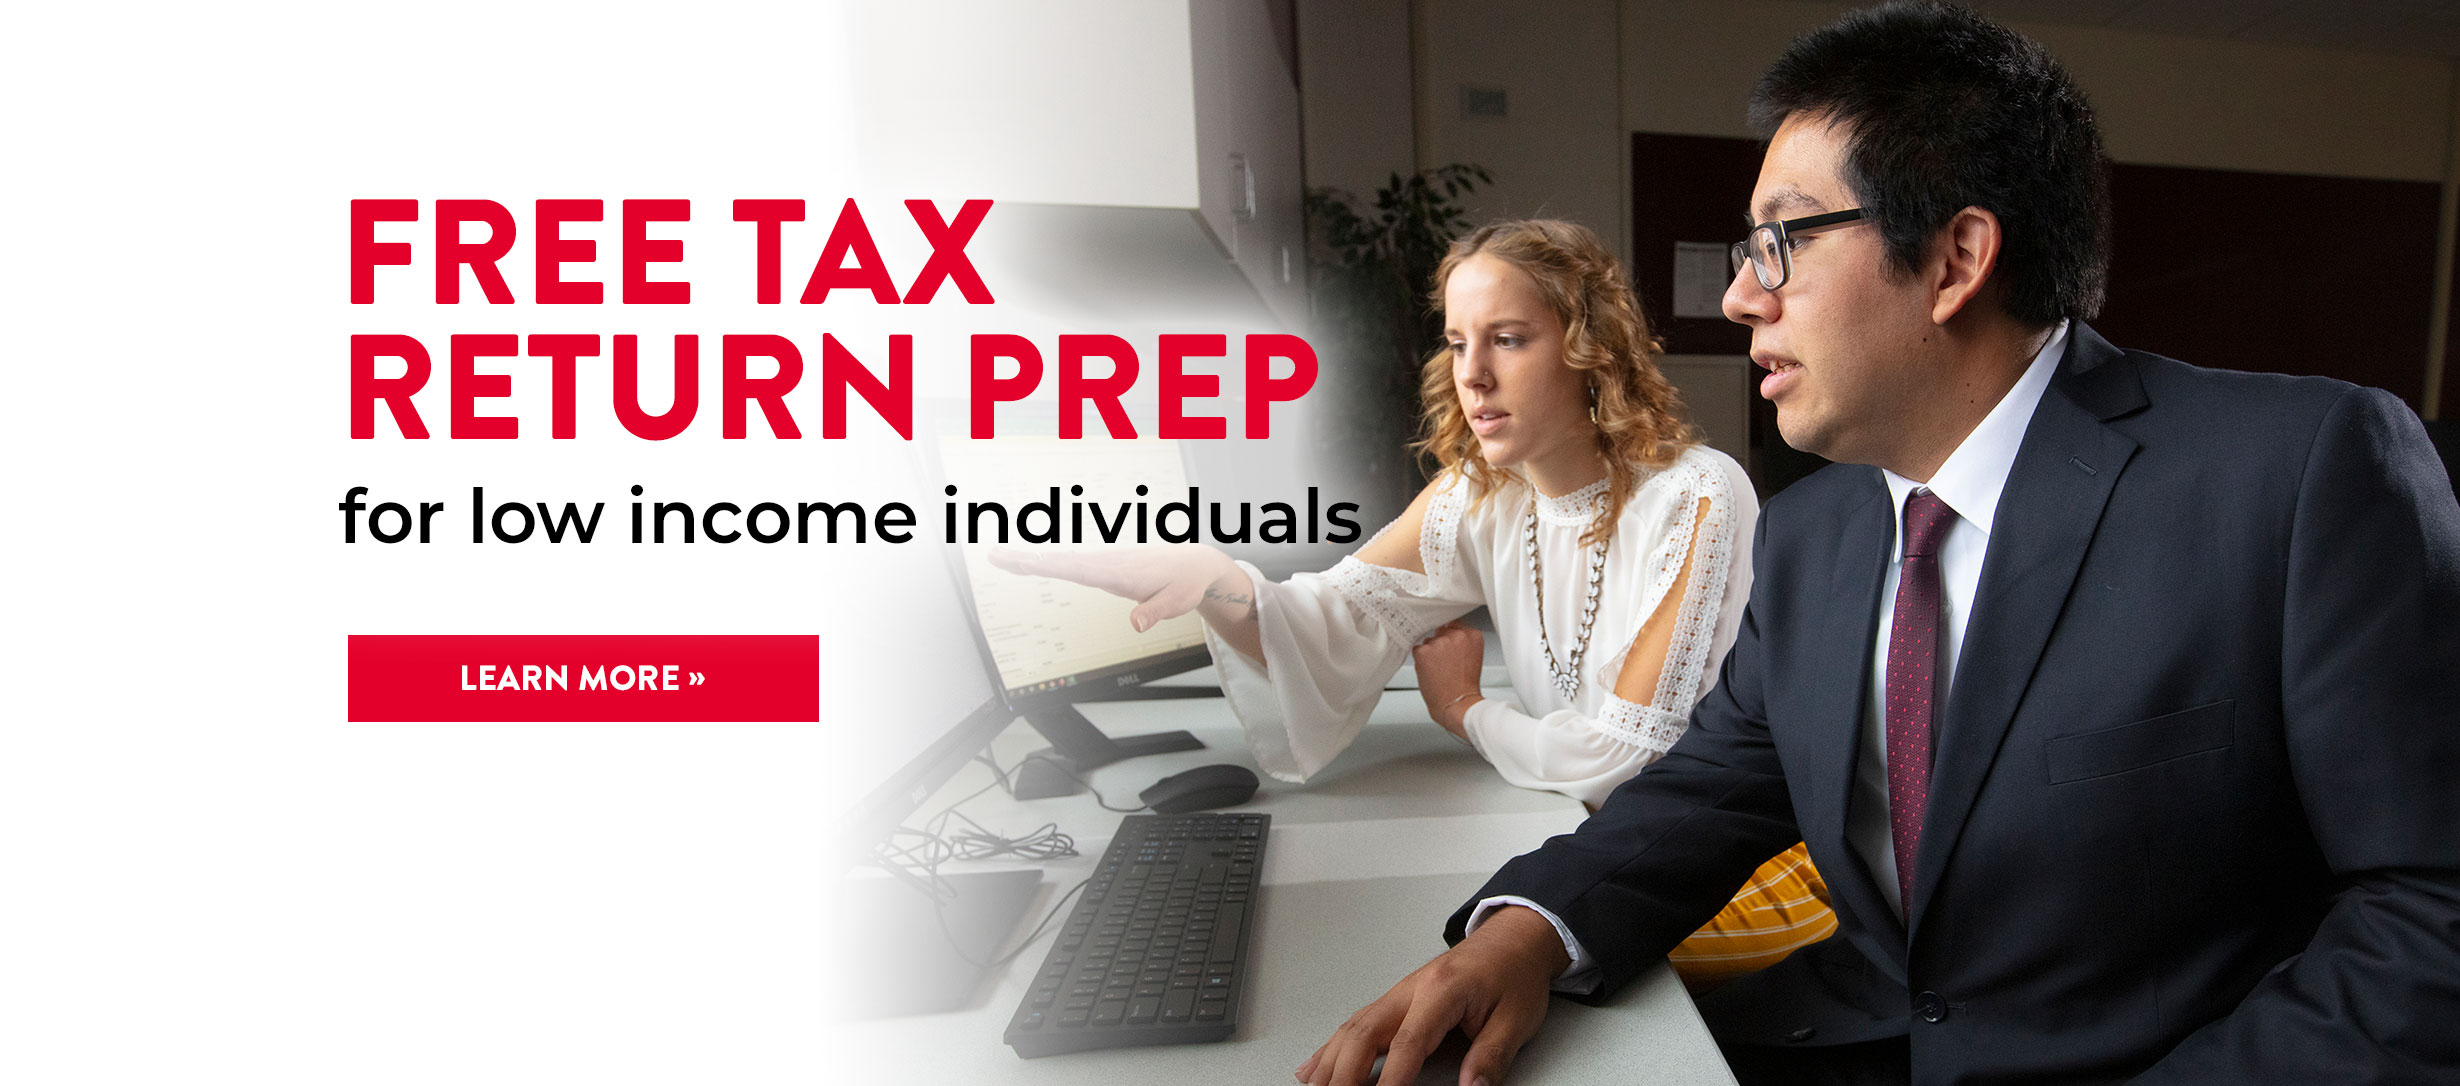 Free Tax Return Prep for Low Income Individuals